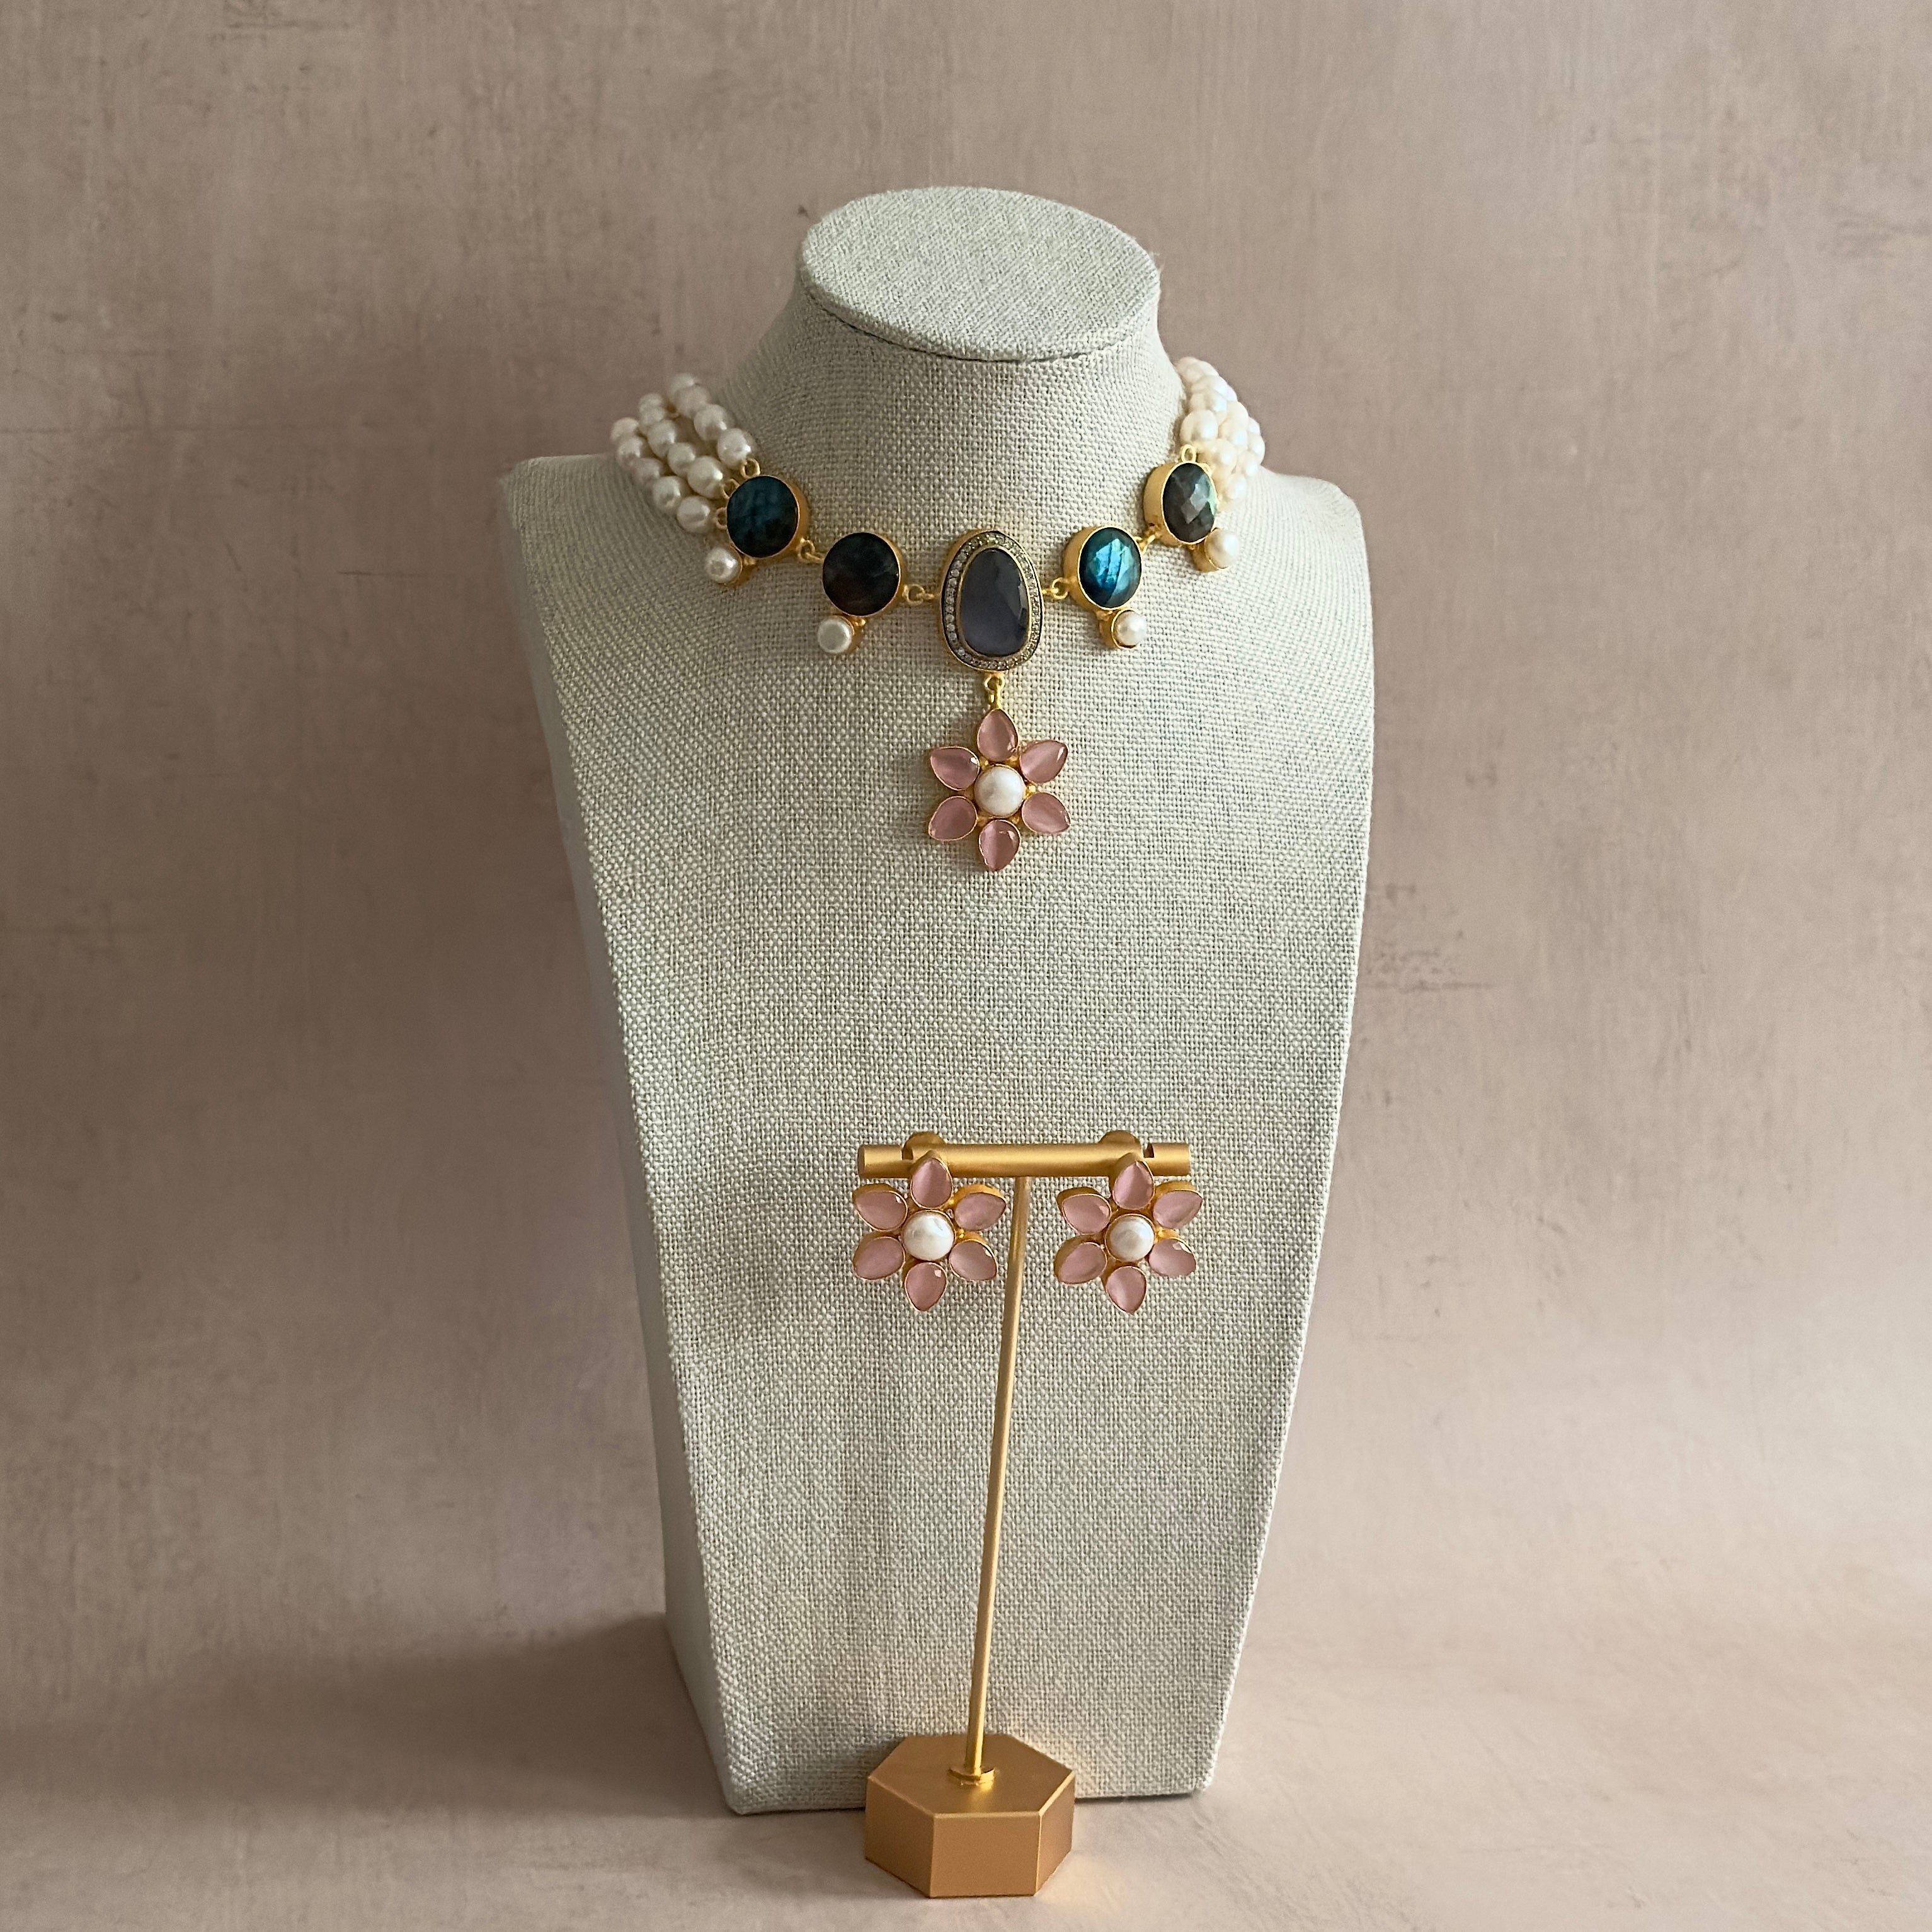 Crafted with mesmerizing labradorite stones and delicate pearl accents, the Sadia Pink Drop Choker Set is a must-have accessory for any occasion. The stunning hues of pink will add a touch of elegance to any outfit, and the matching earrings complete the look. Upgrade your jewelry collection with this beautiful set.